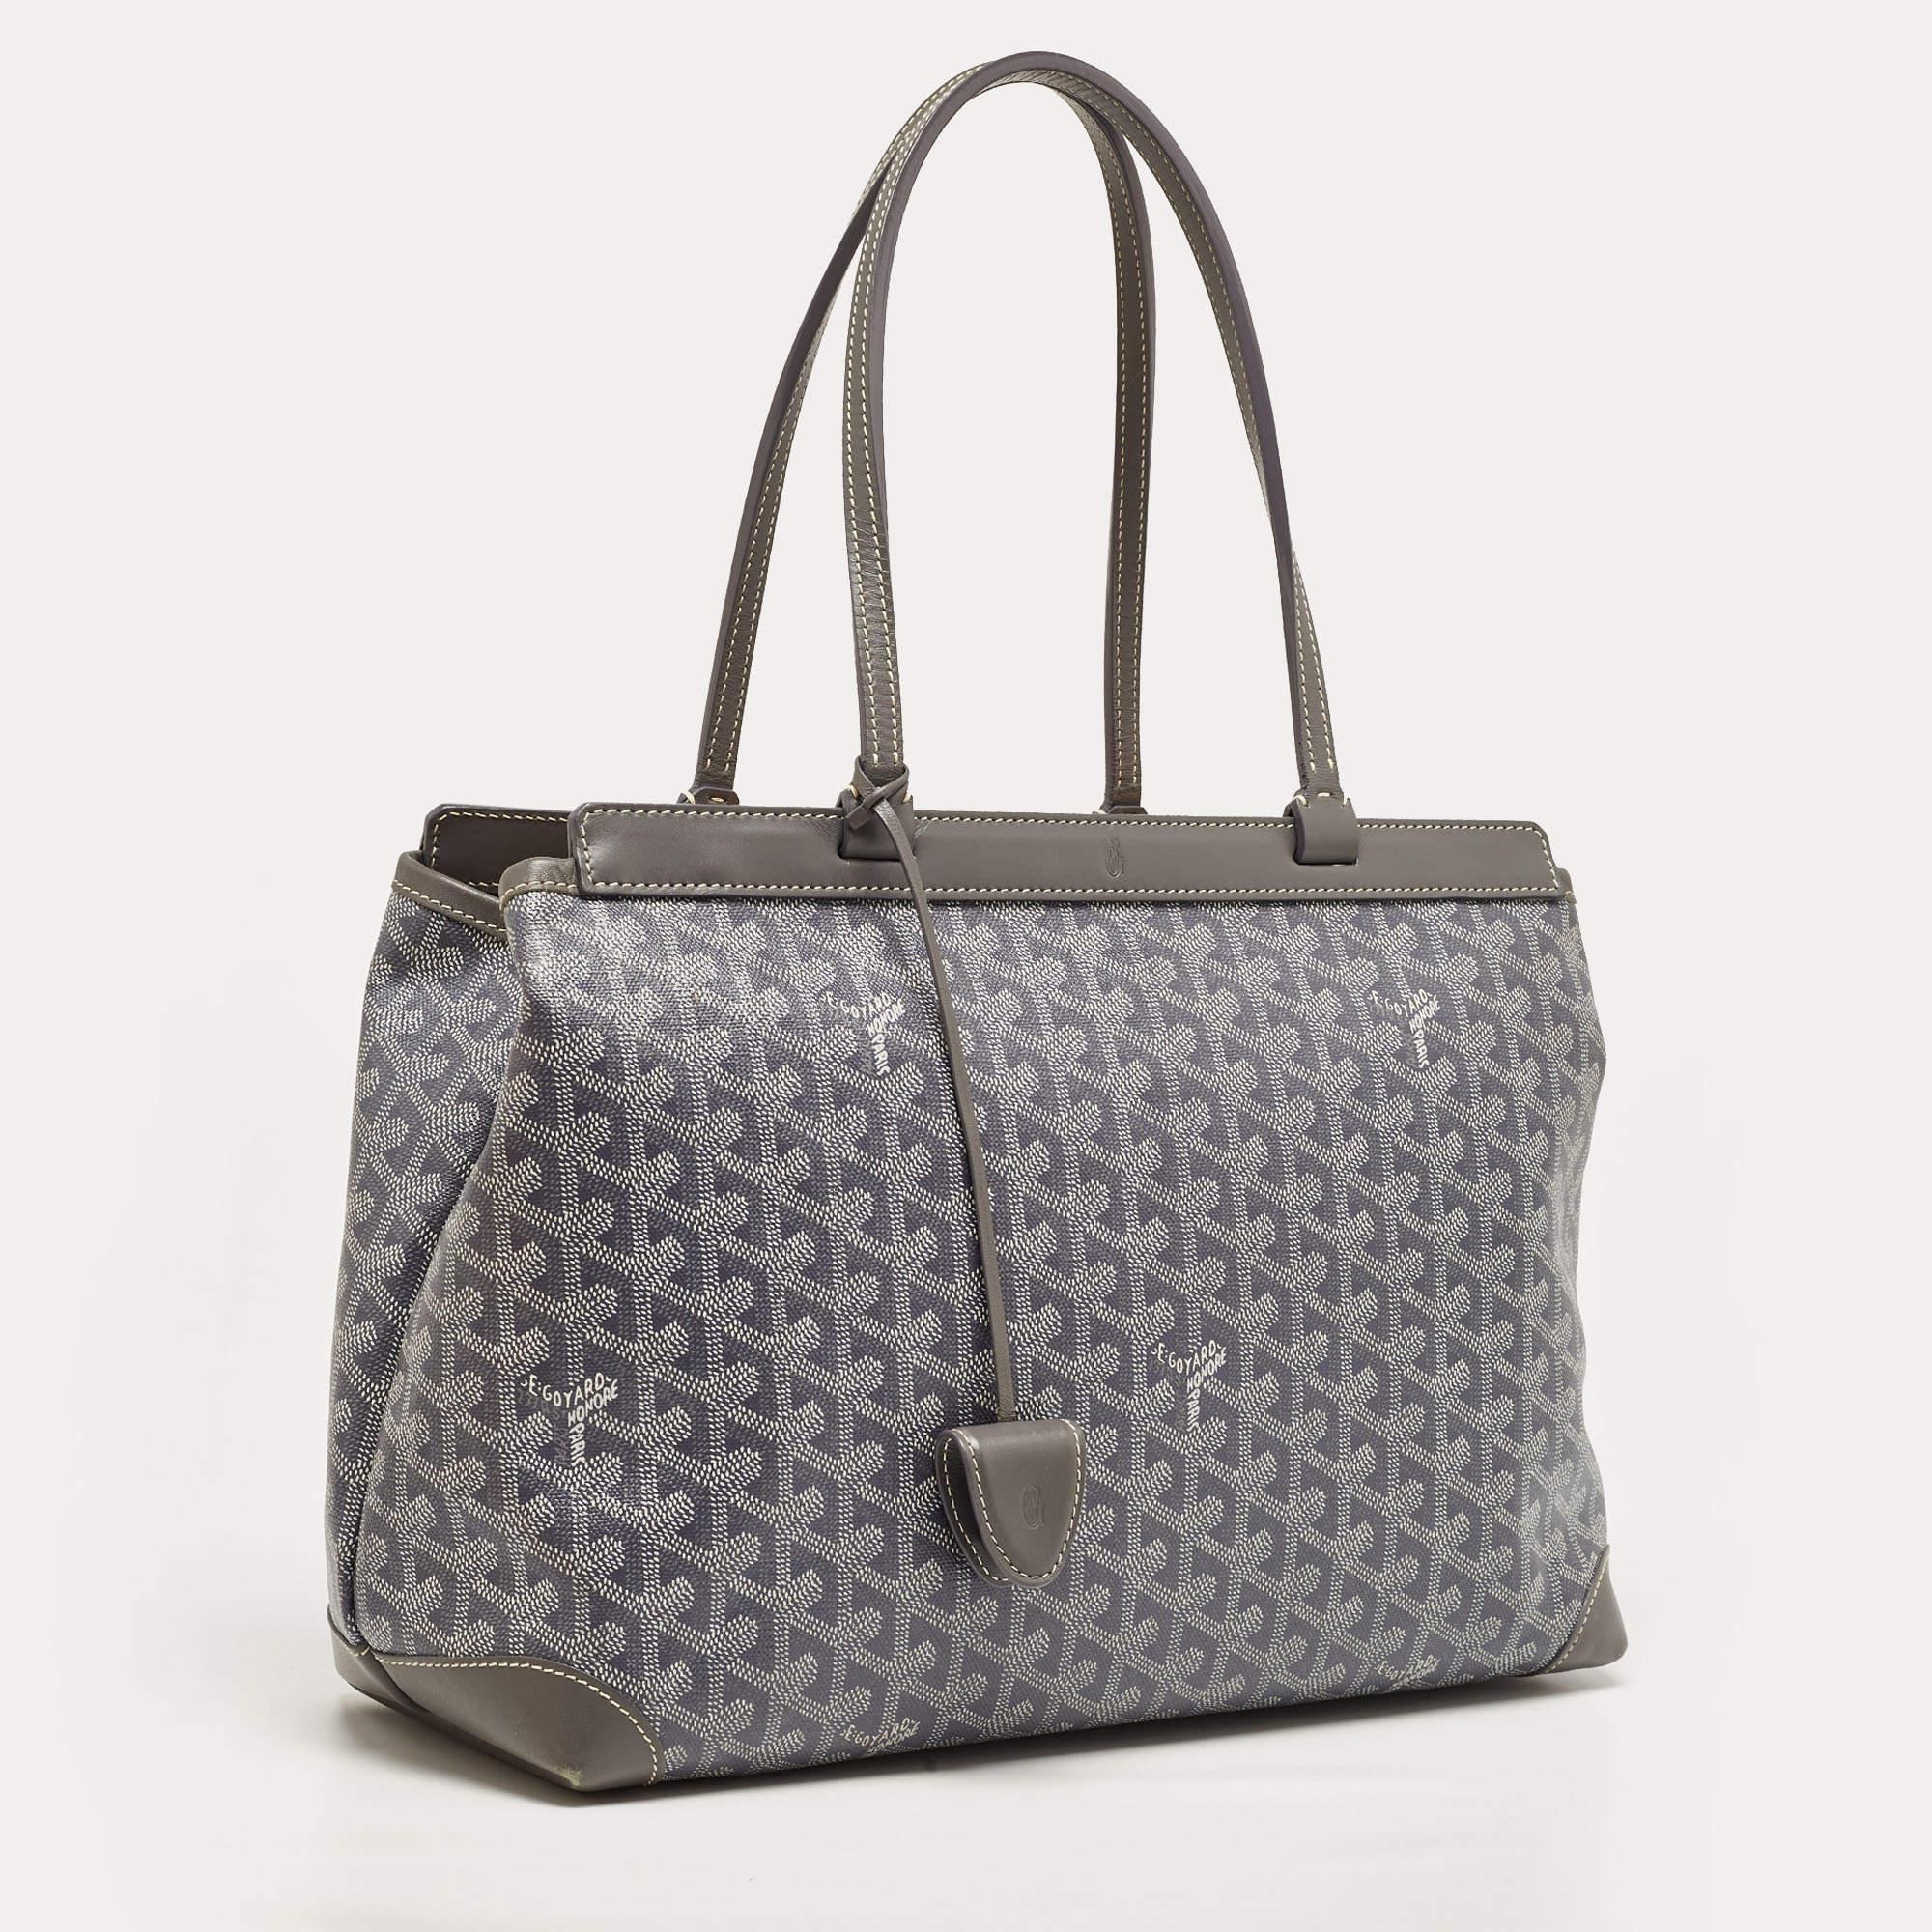 The classy silhouette and the use of durable materials for the exterior bring out the appeal of this Goyard tote for women. It features comfortable handles and a well-lined interior.

